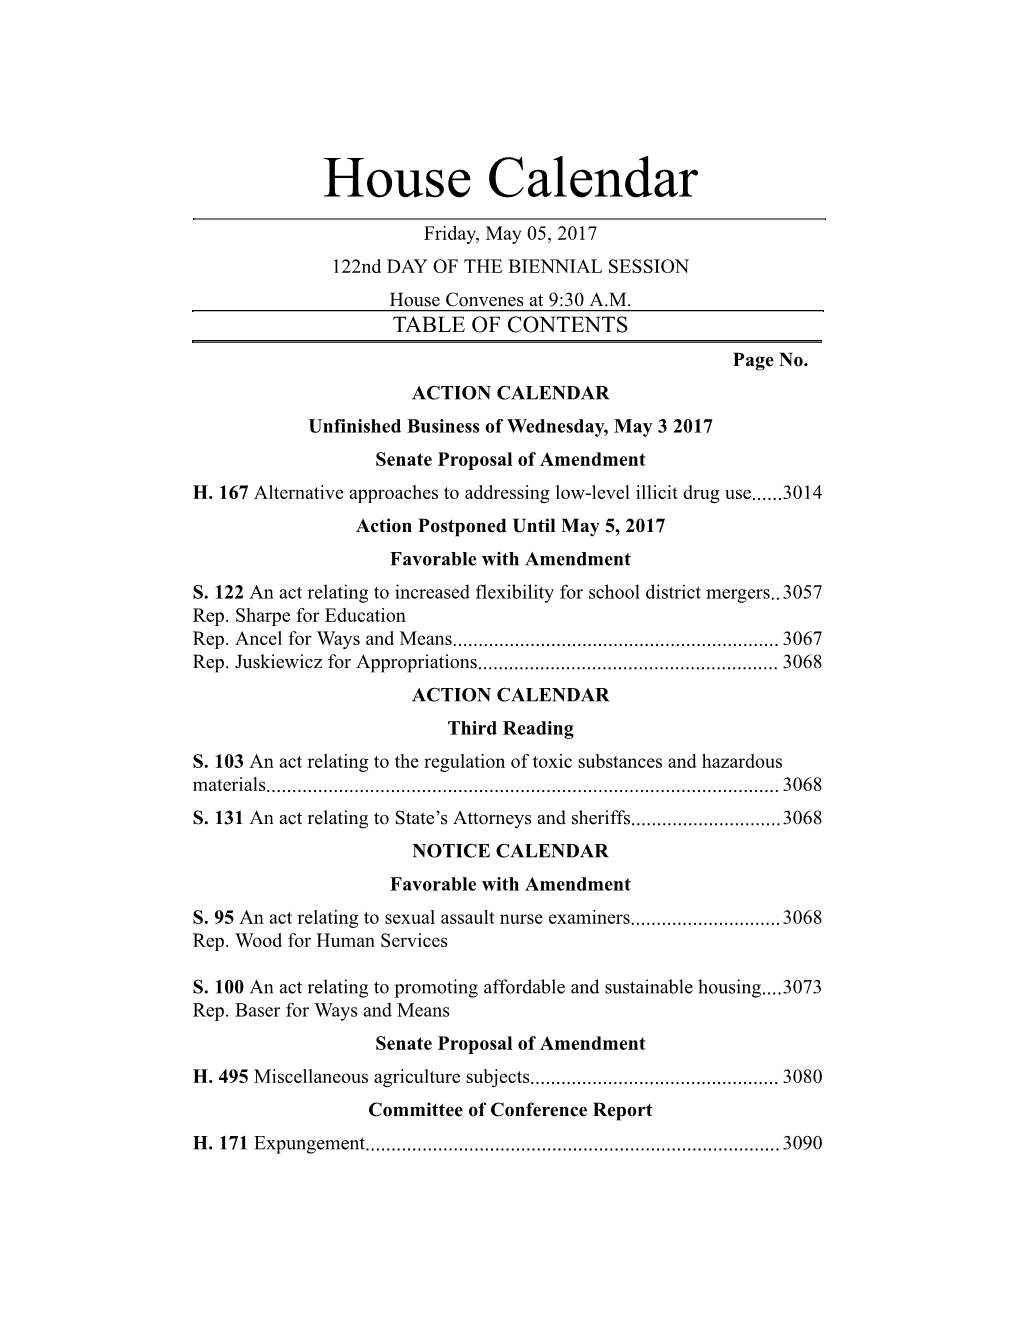 House Calendar Friday, May 05, 2017 122Nd DAY of the BIENNIAL SESSION House Convenes at 9:30 A.M